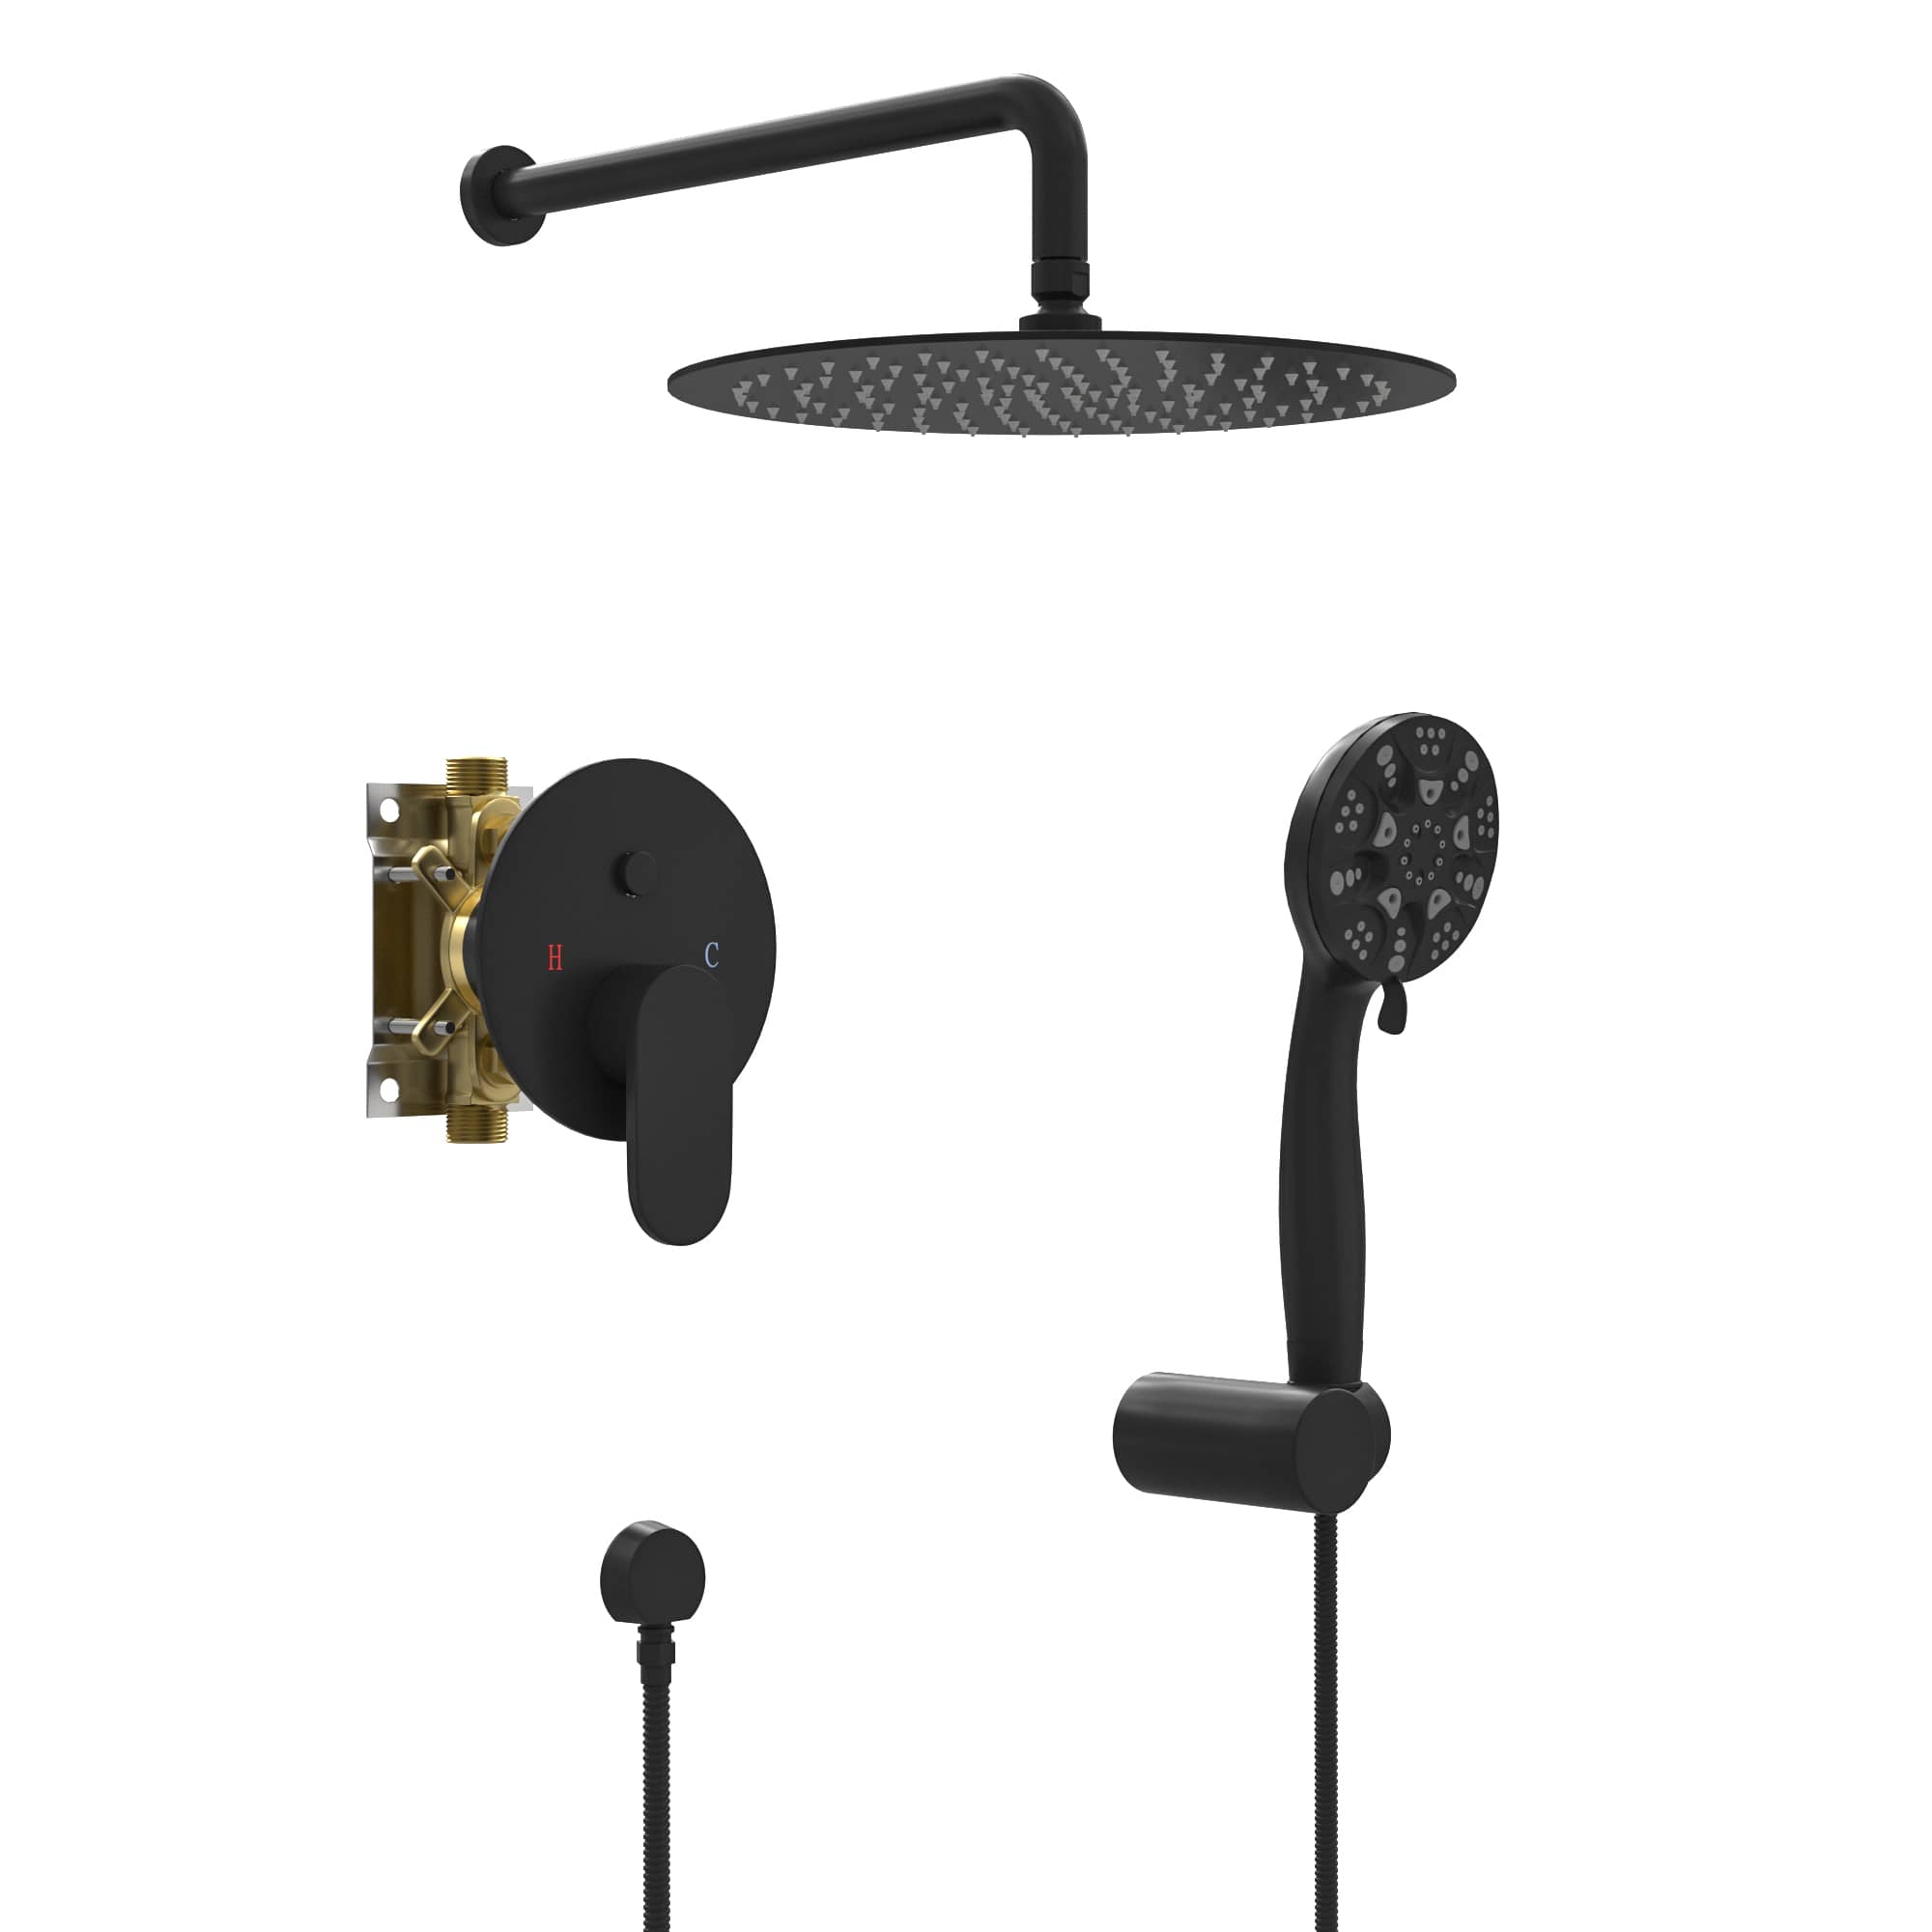 5-Spray Patterns 10 in. Wall Mounted Rain Fixed Shower head with Dual Shower Heads in Matte Black (Pressure Balance)